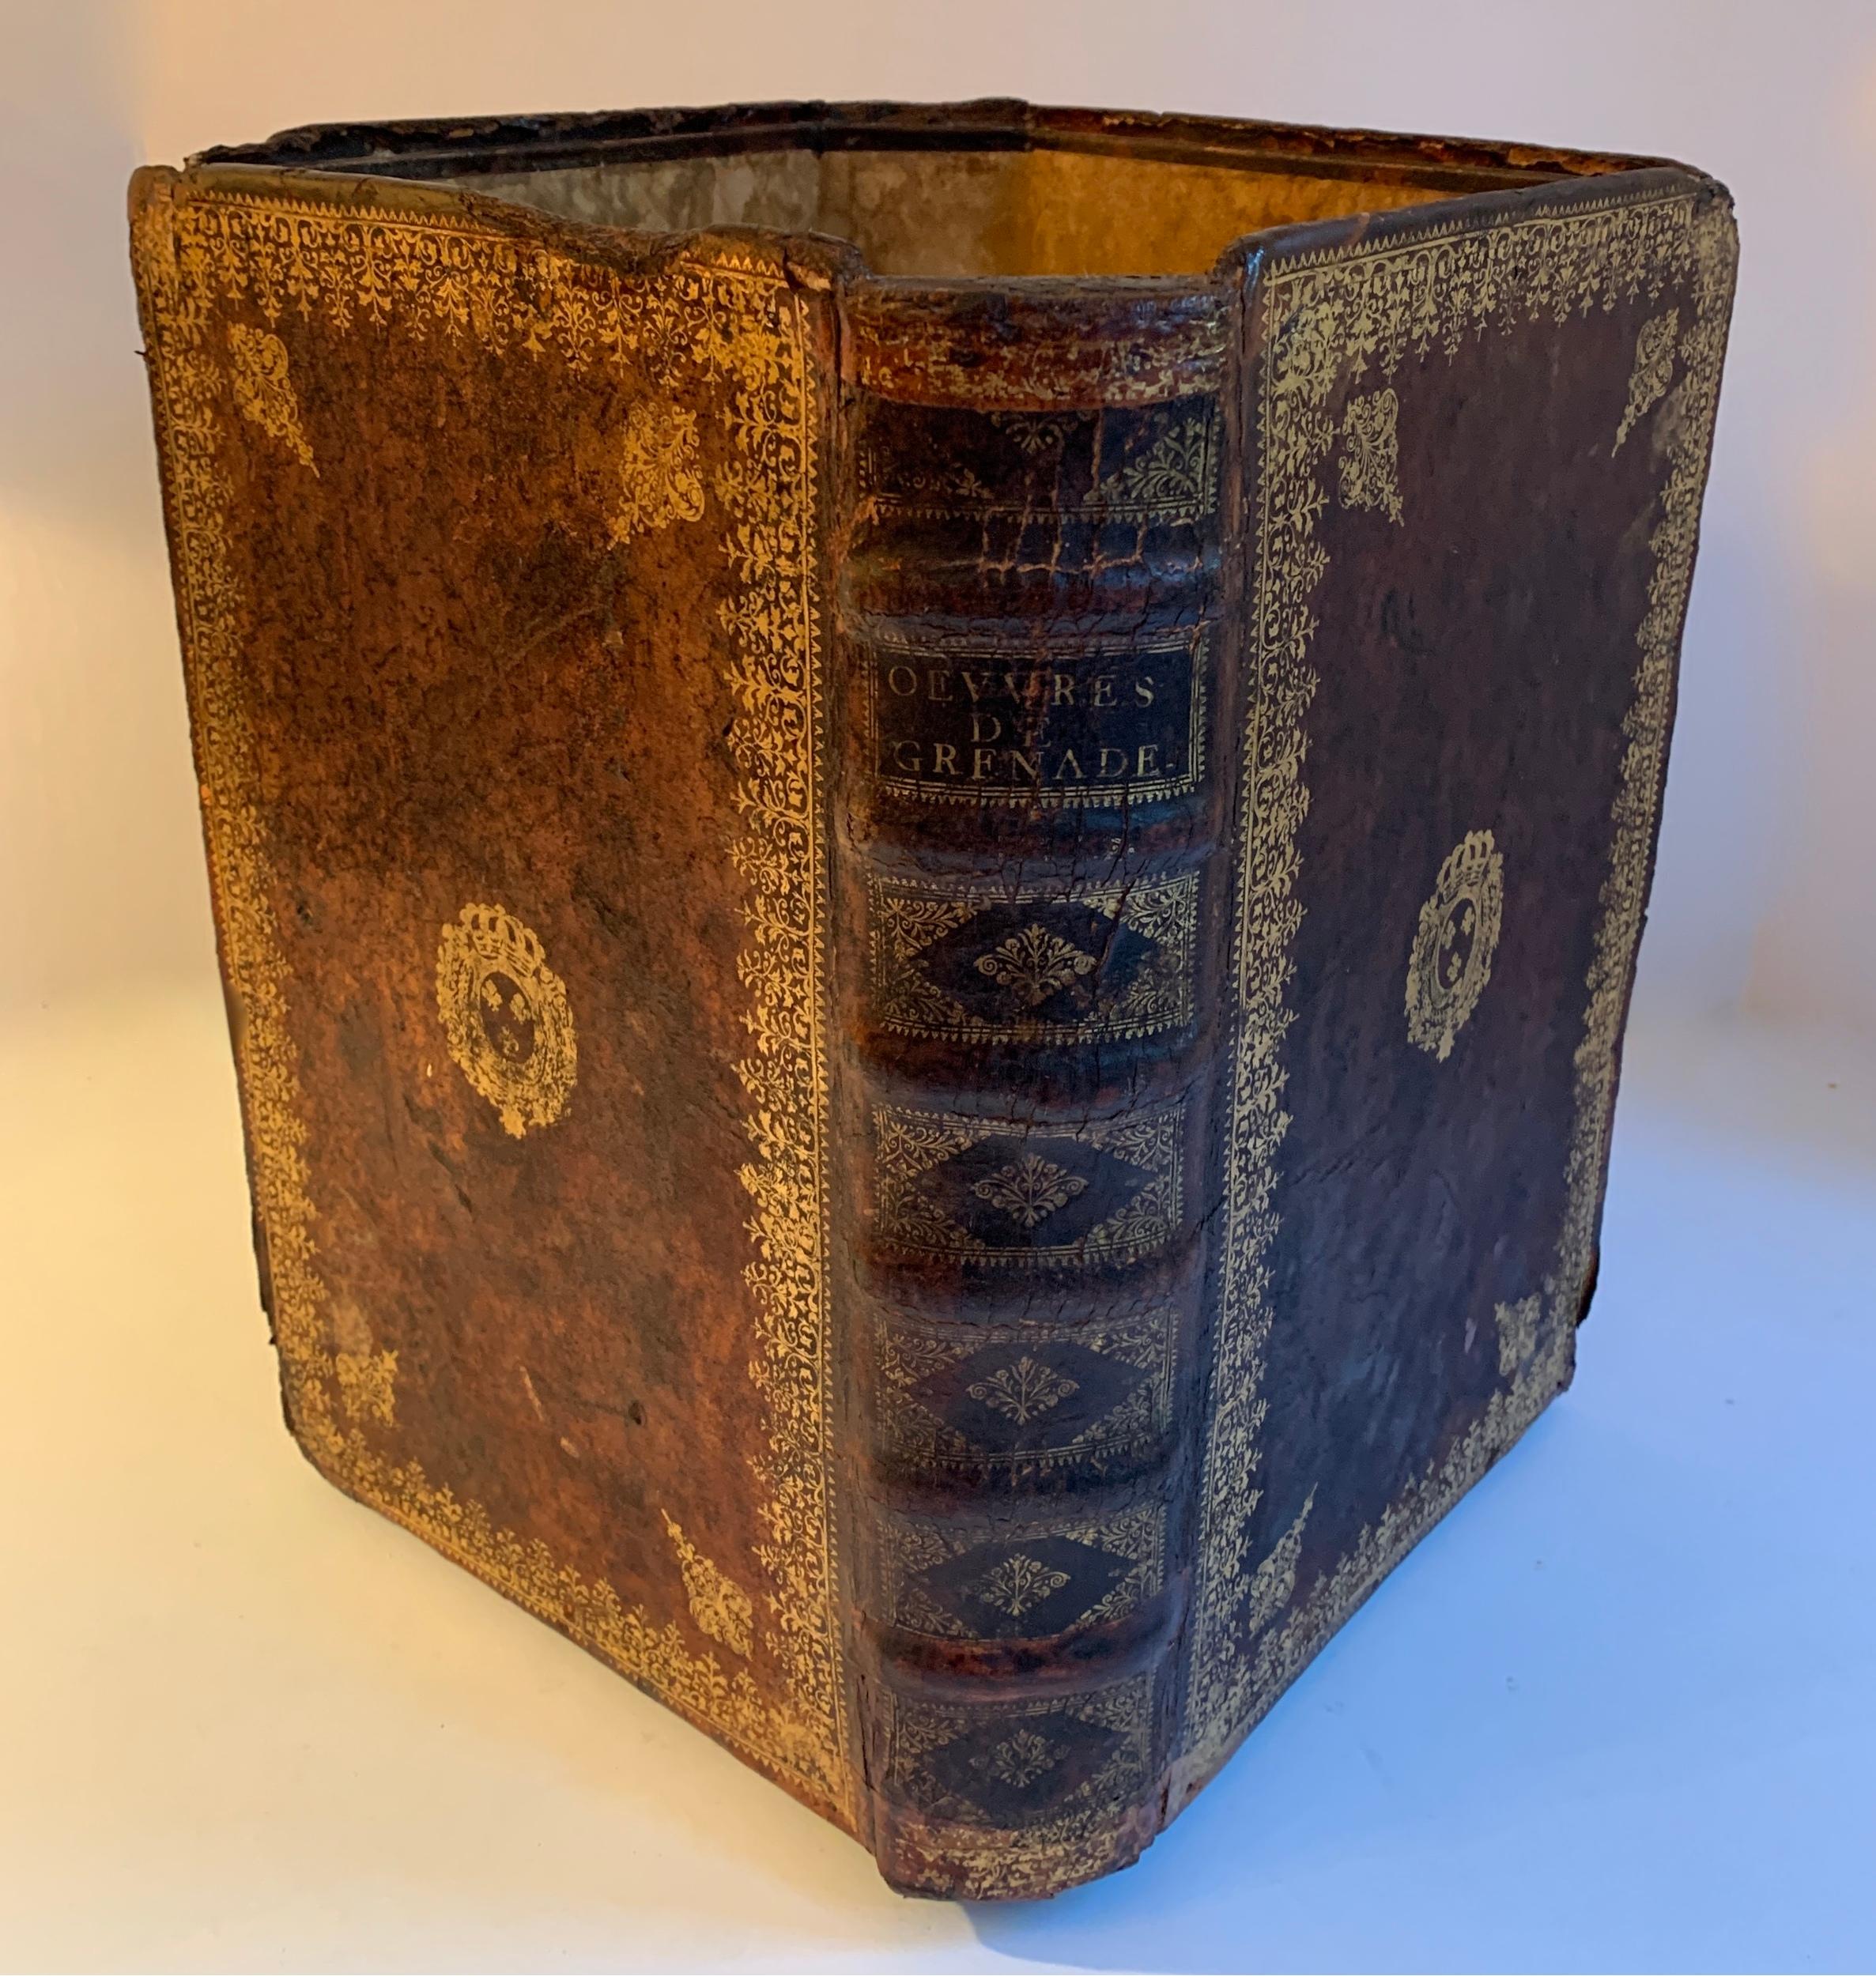 A handmade leather waste bin made of vintage leather bound books. The bin is quite large and substantial for next to a desk in your den, library of office. A trash can never looked better or more attractive than this - we have found several and they